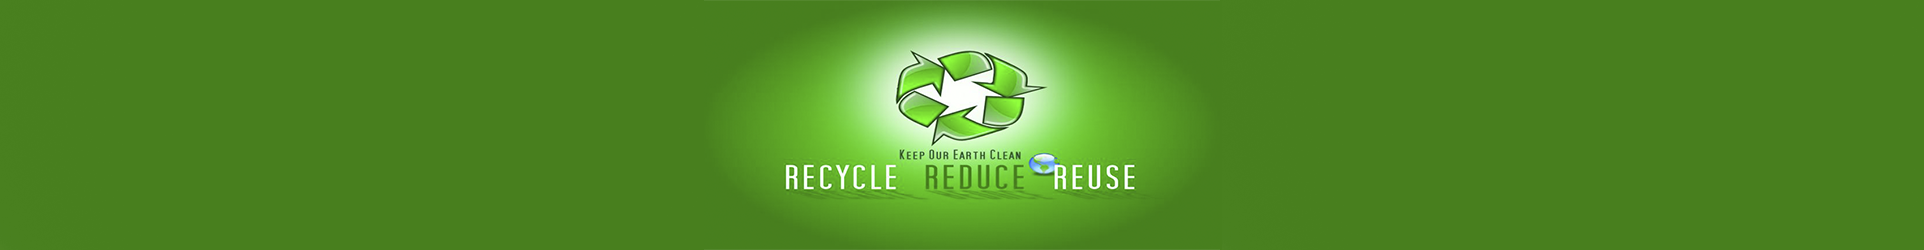 keep our earth clean. Recycle. Reduce. Reuse.